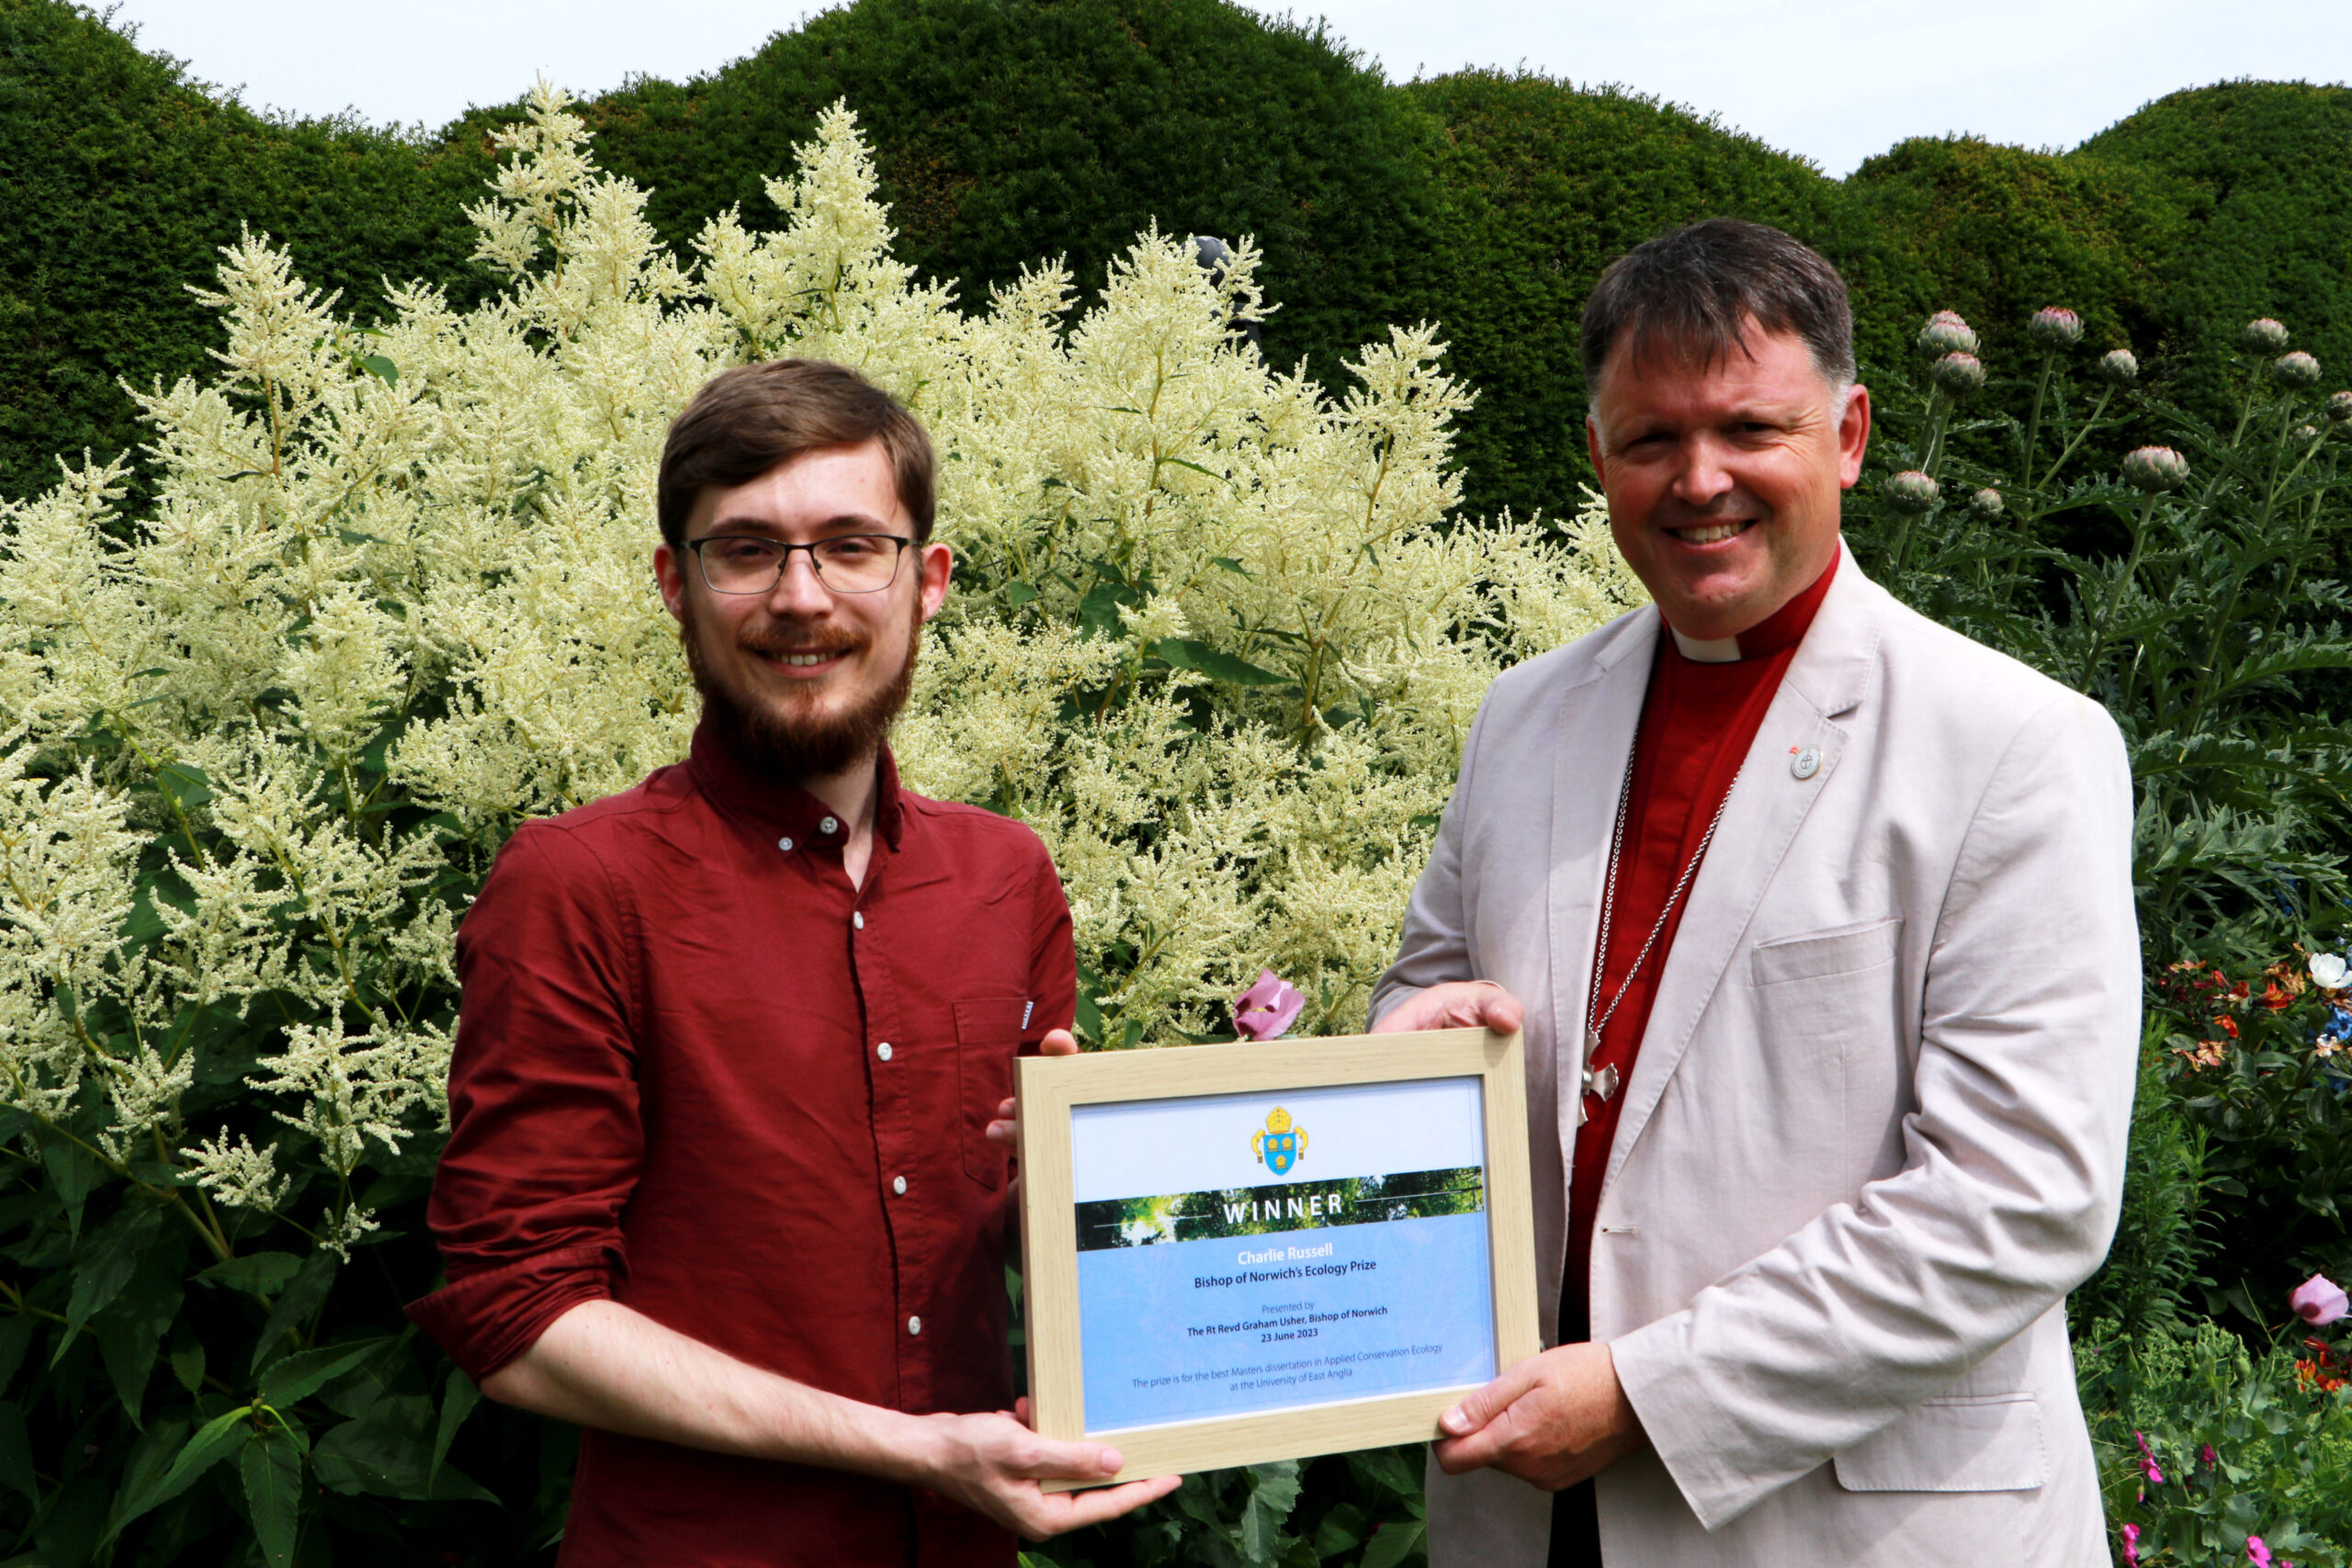 Charlie Russell being presented with his award by Bishop Graham